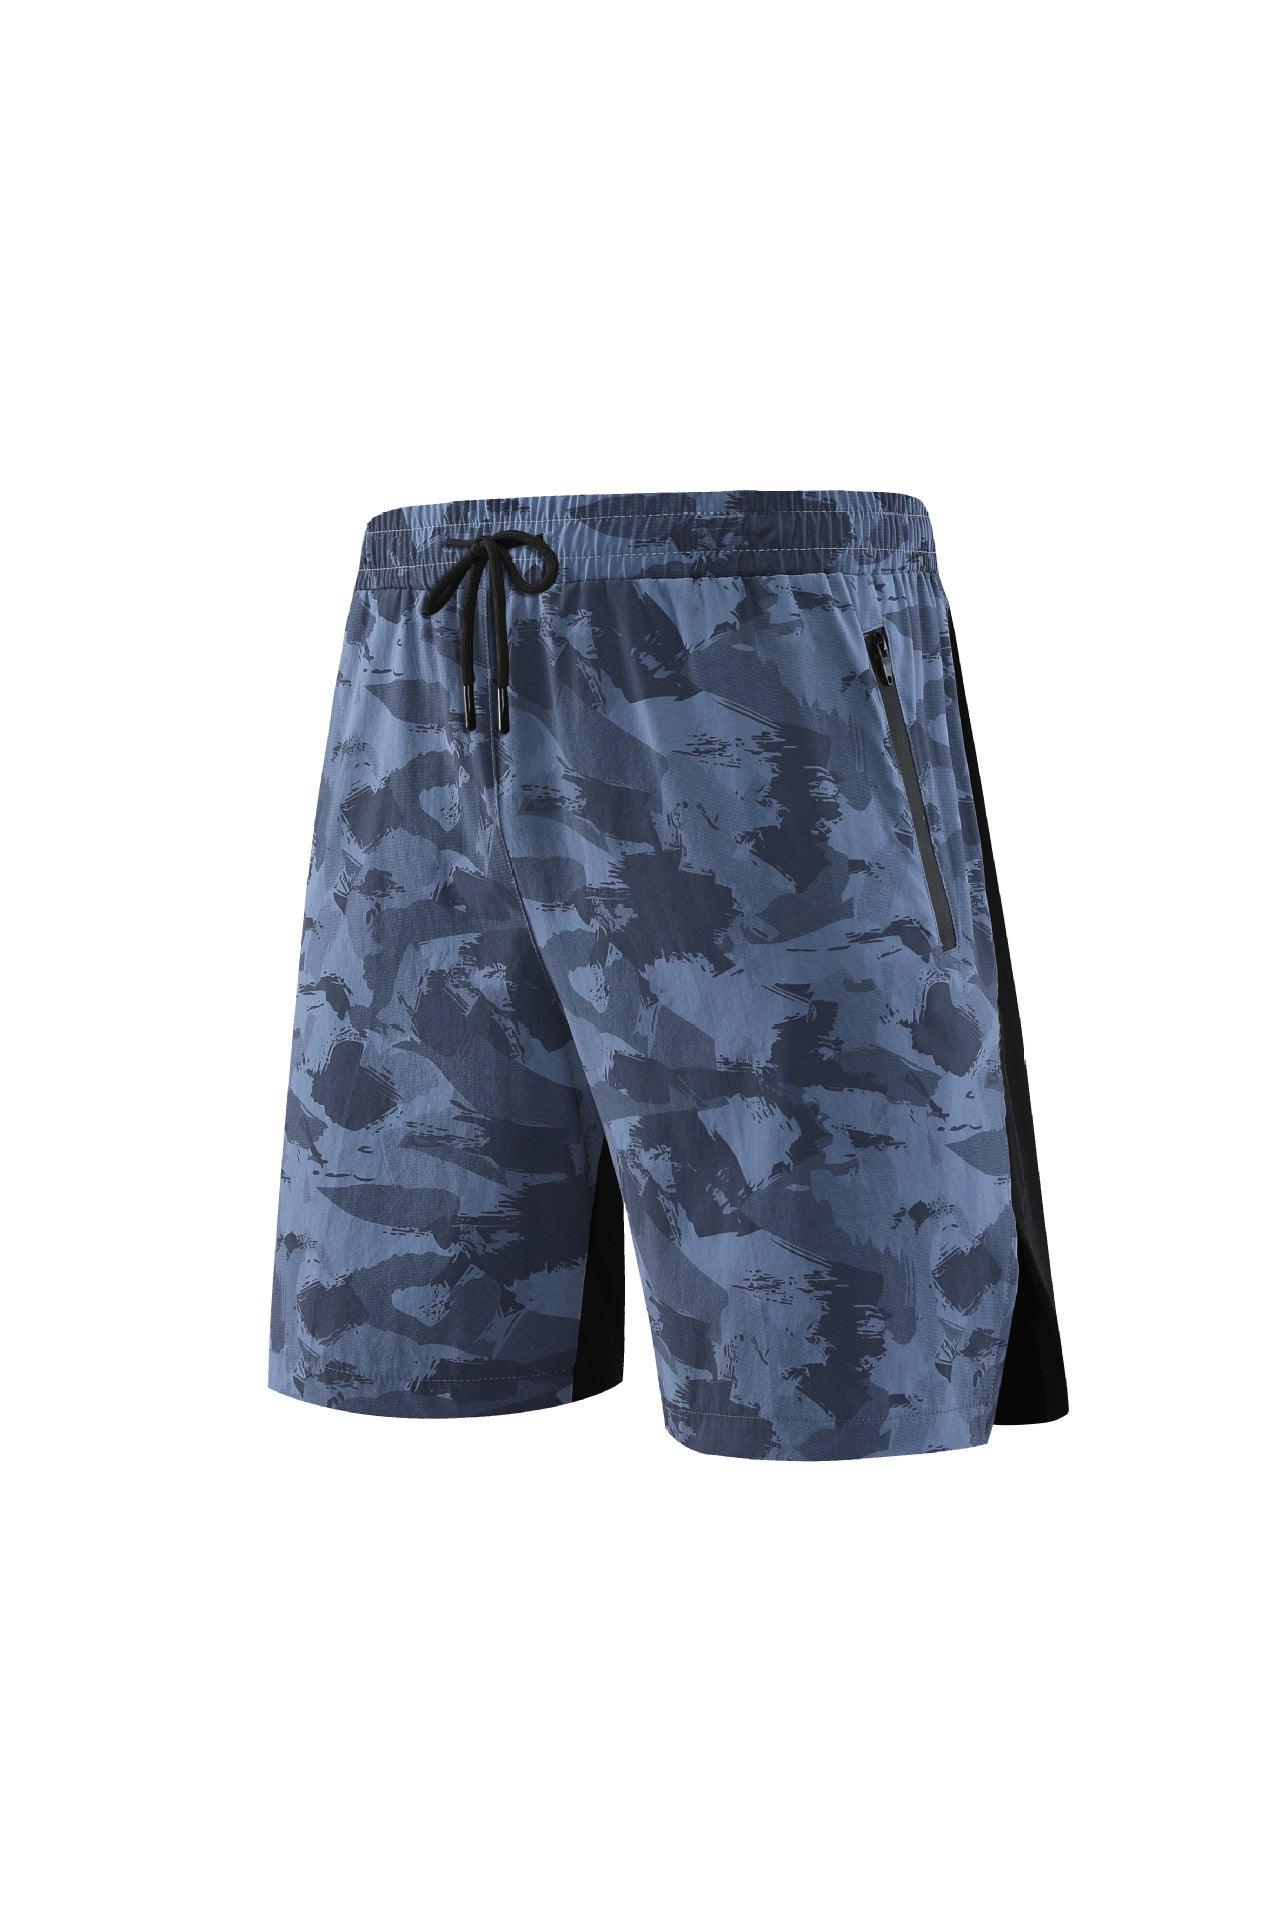 Camouflage Casual Sports Shorts Men's Summer - Nioor